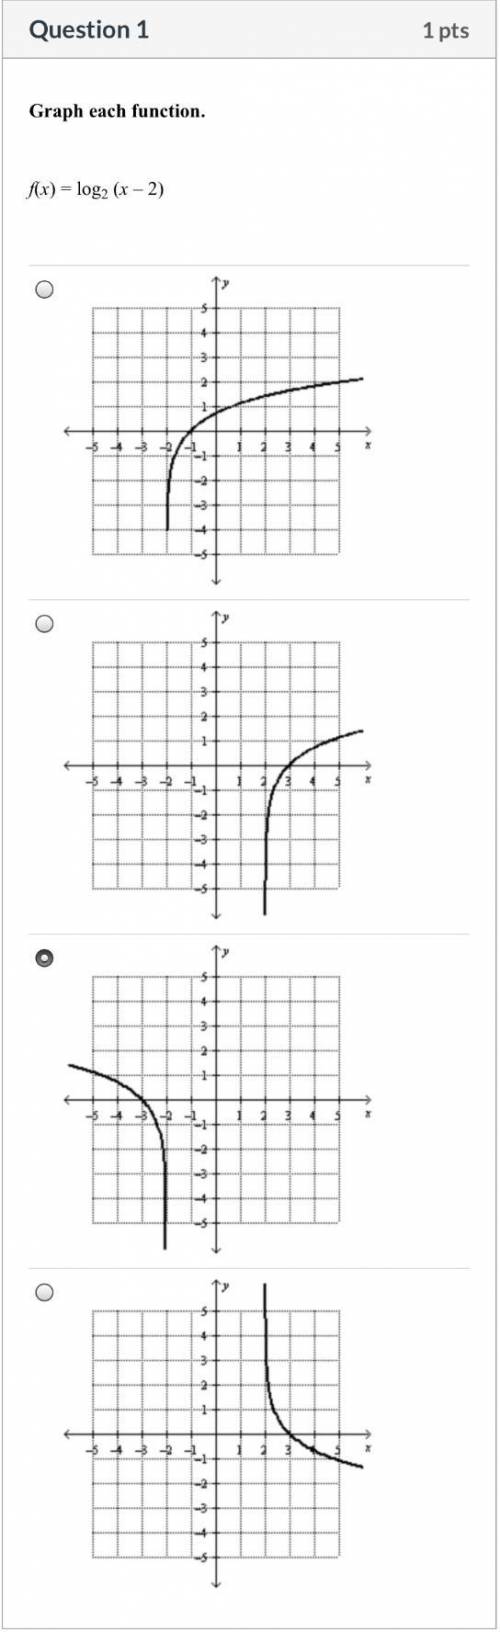 Graph each function. Which option is correct?